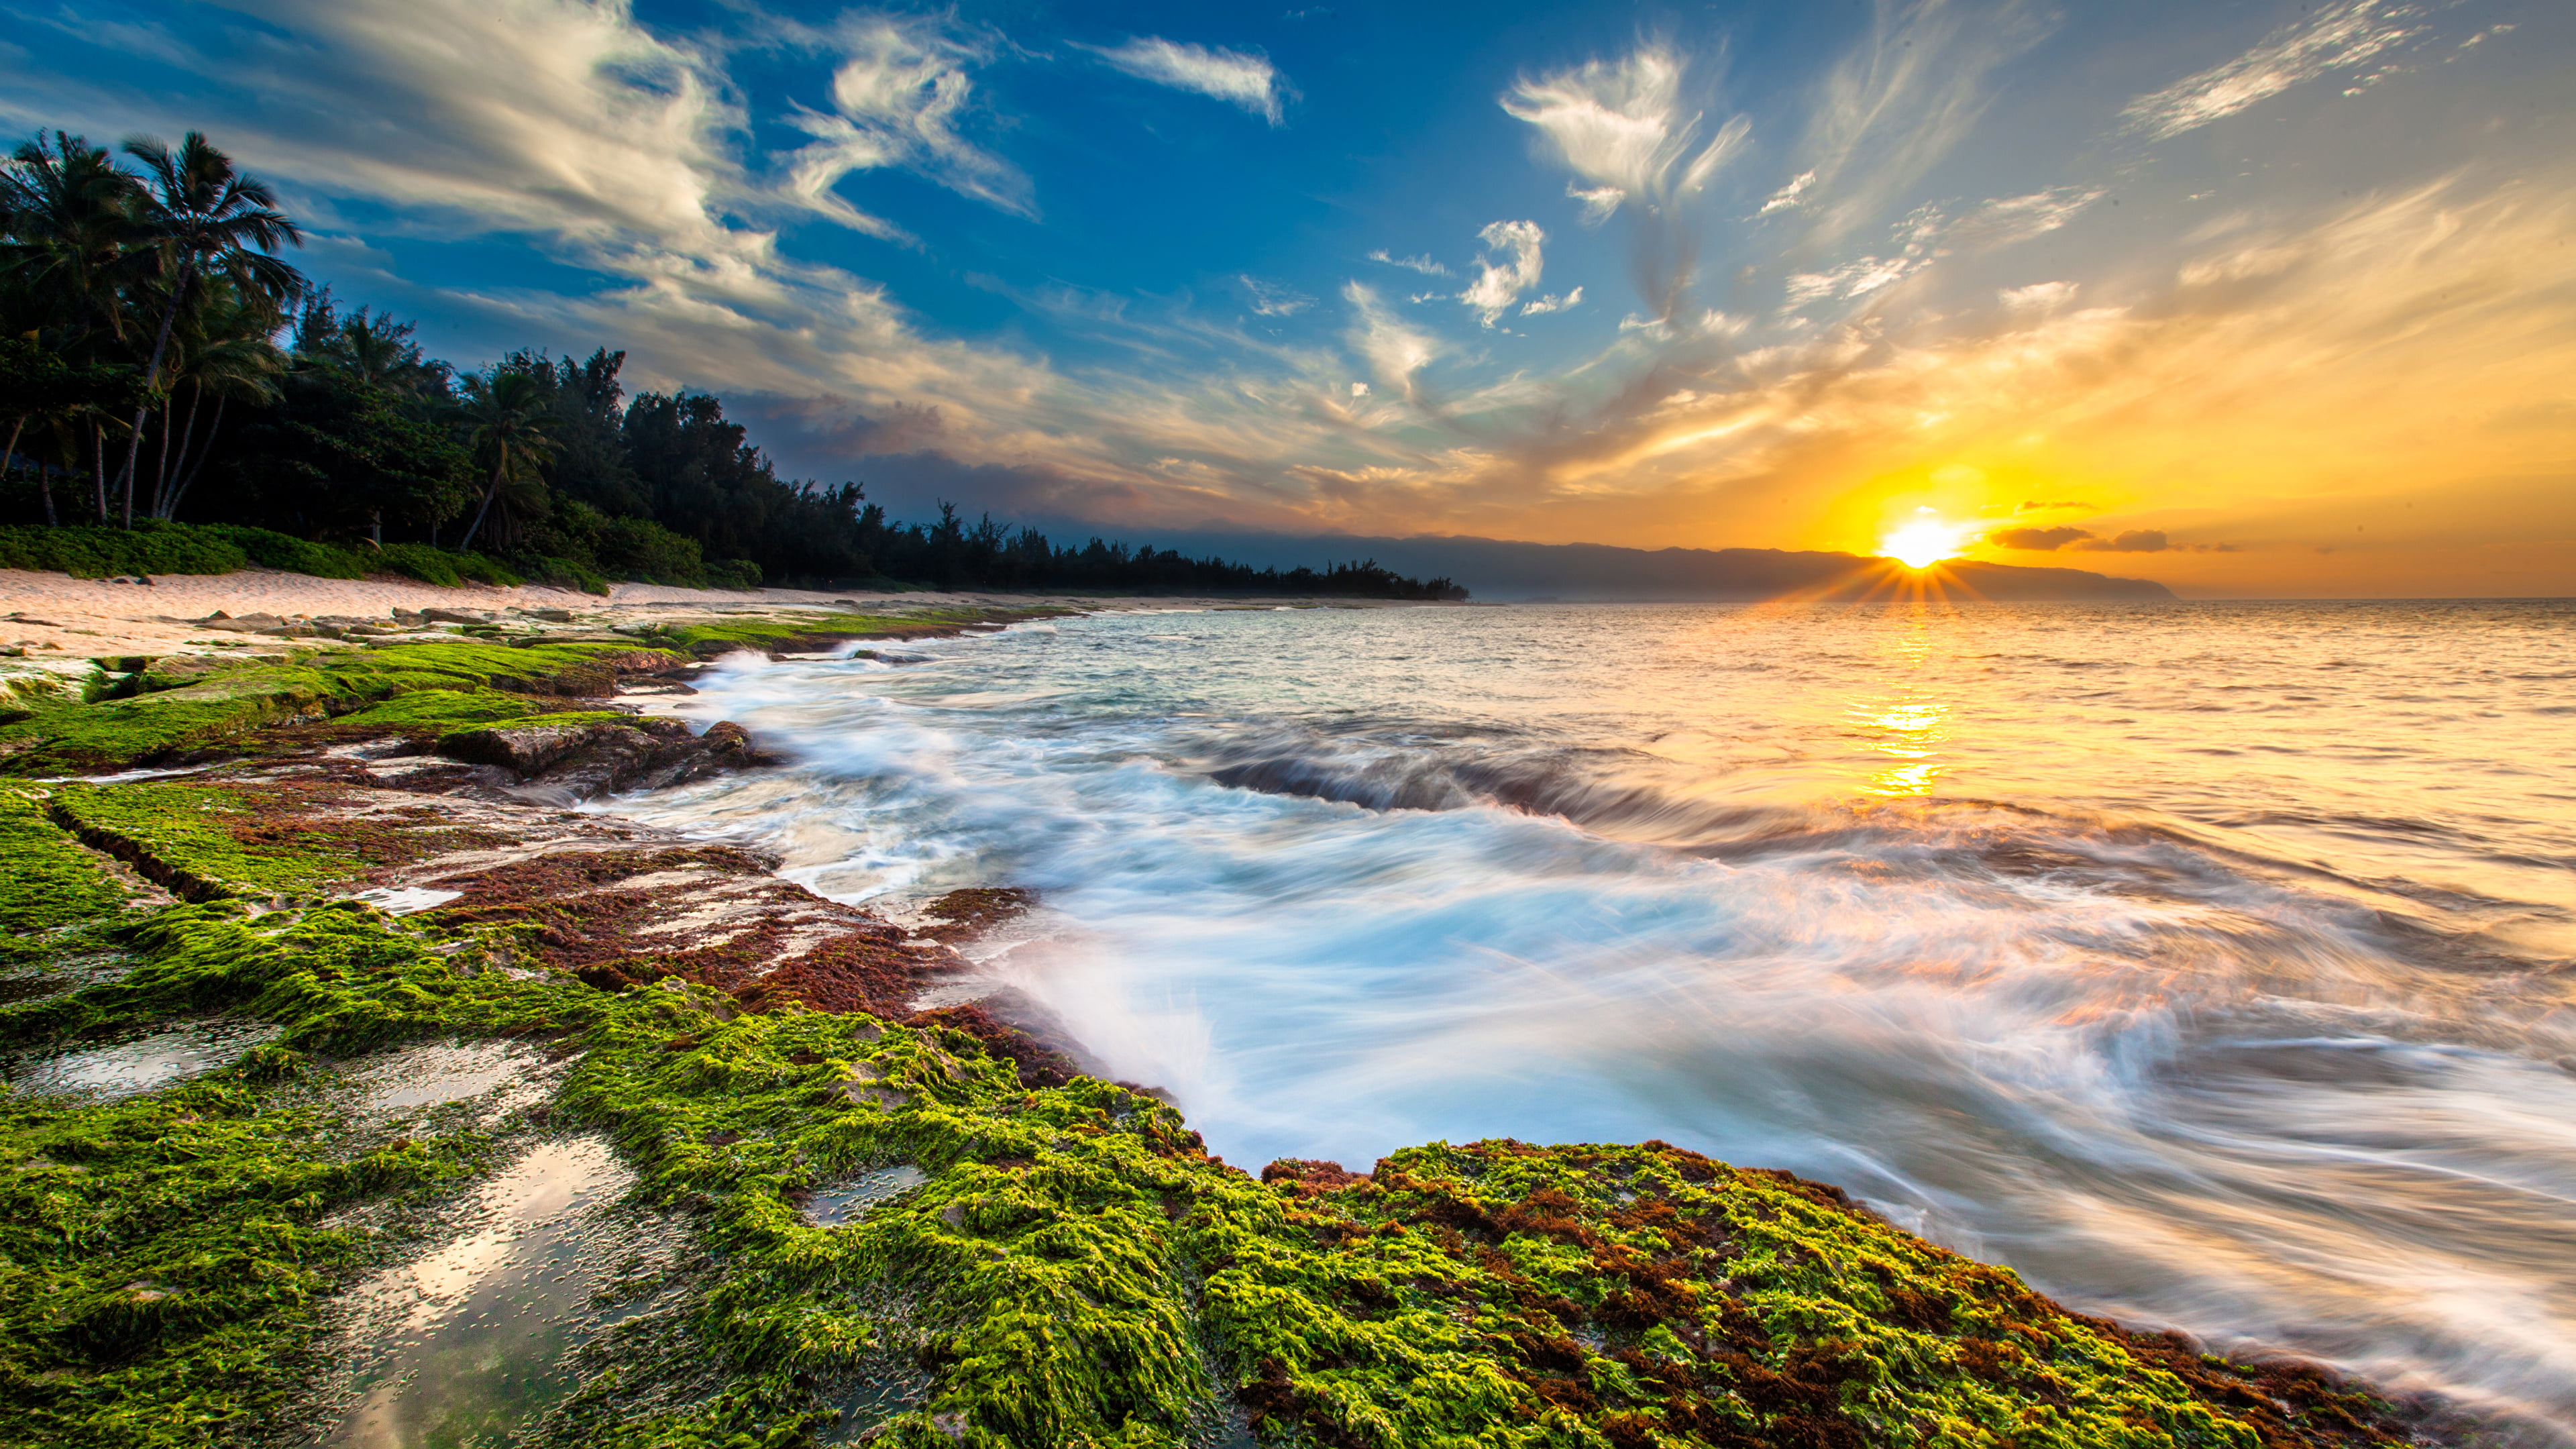 Sunset Over Maui Beach Dawn In Hawaii 4k Ultra Hd Wallpaper For Mobile Phones And Computer 3840×2160